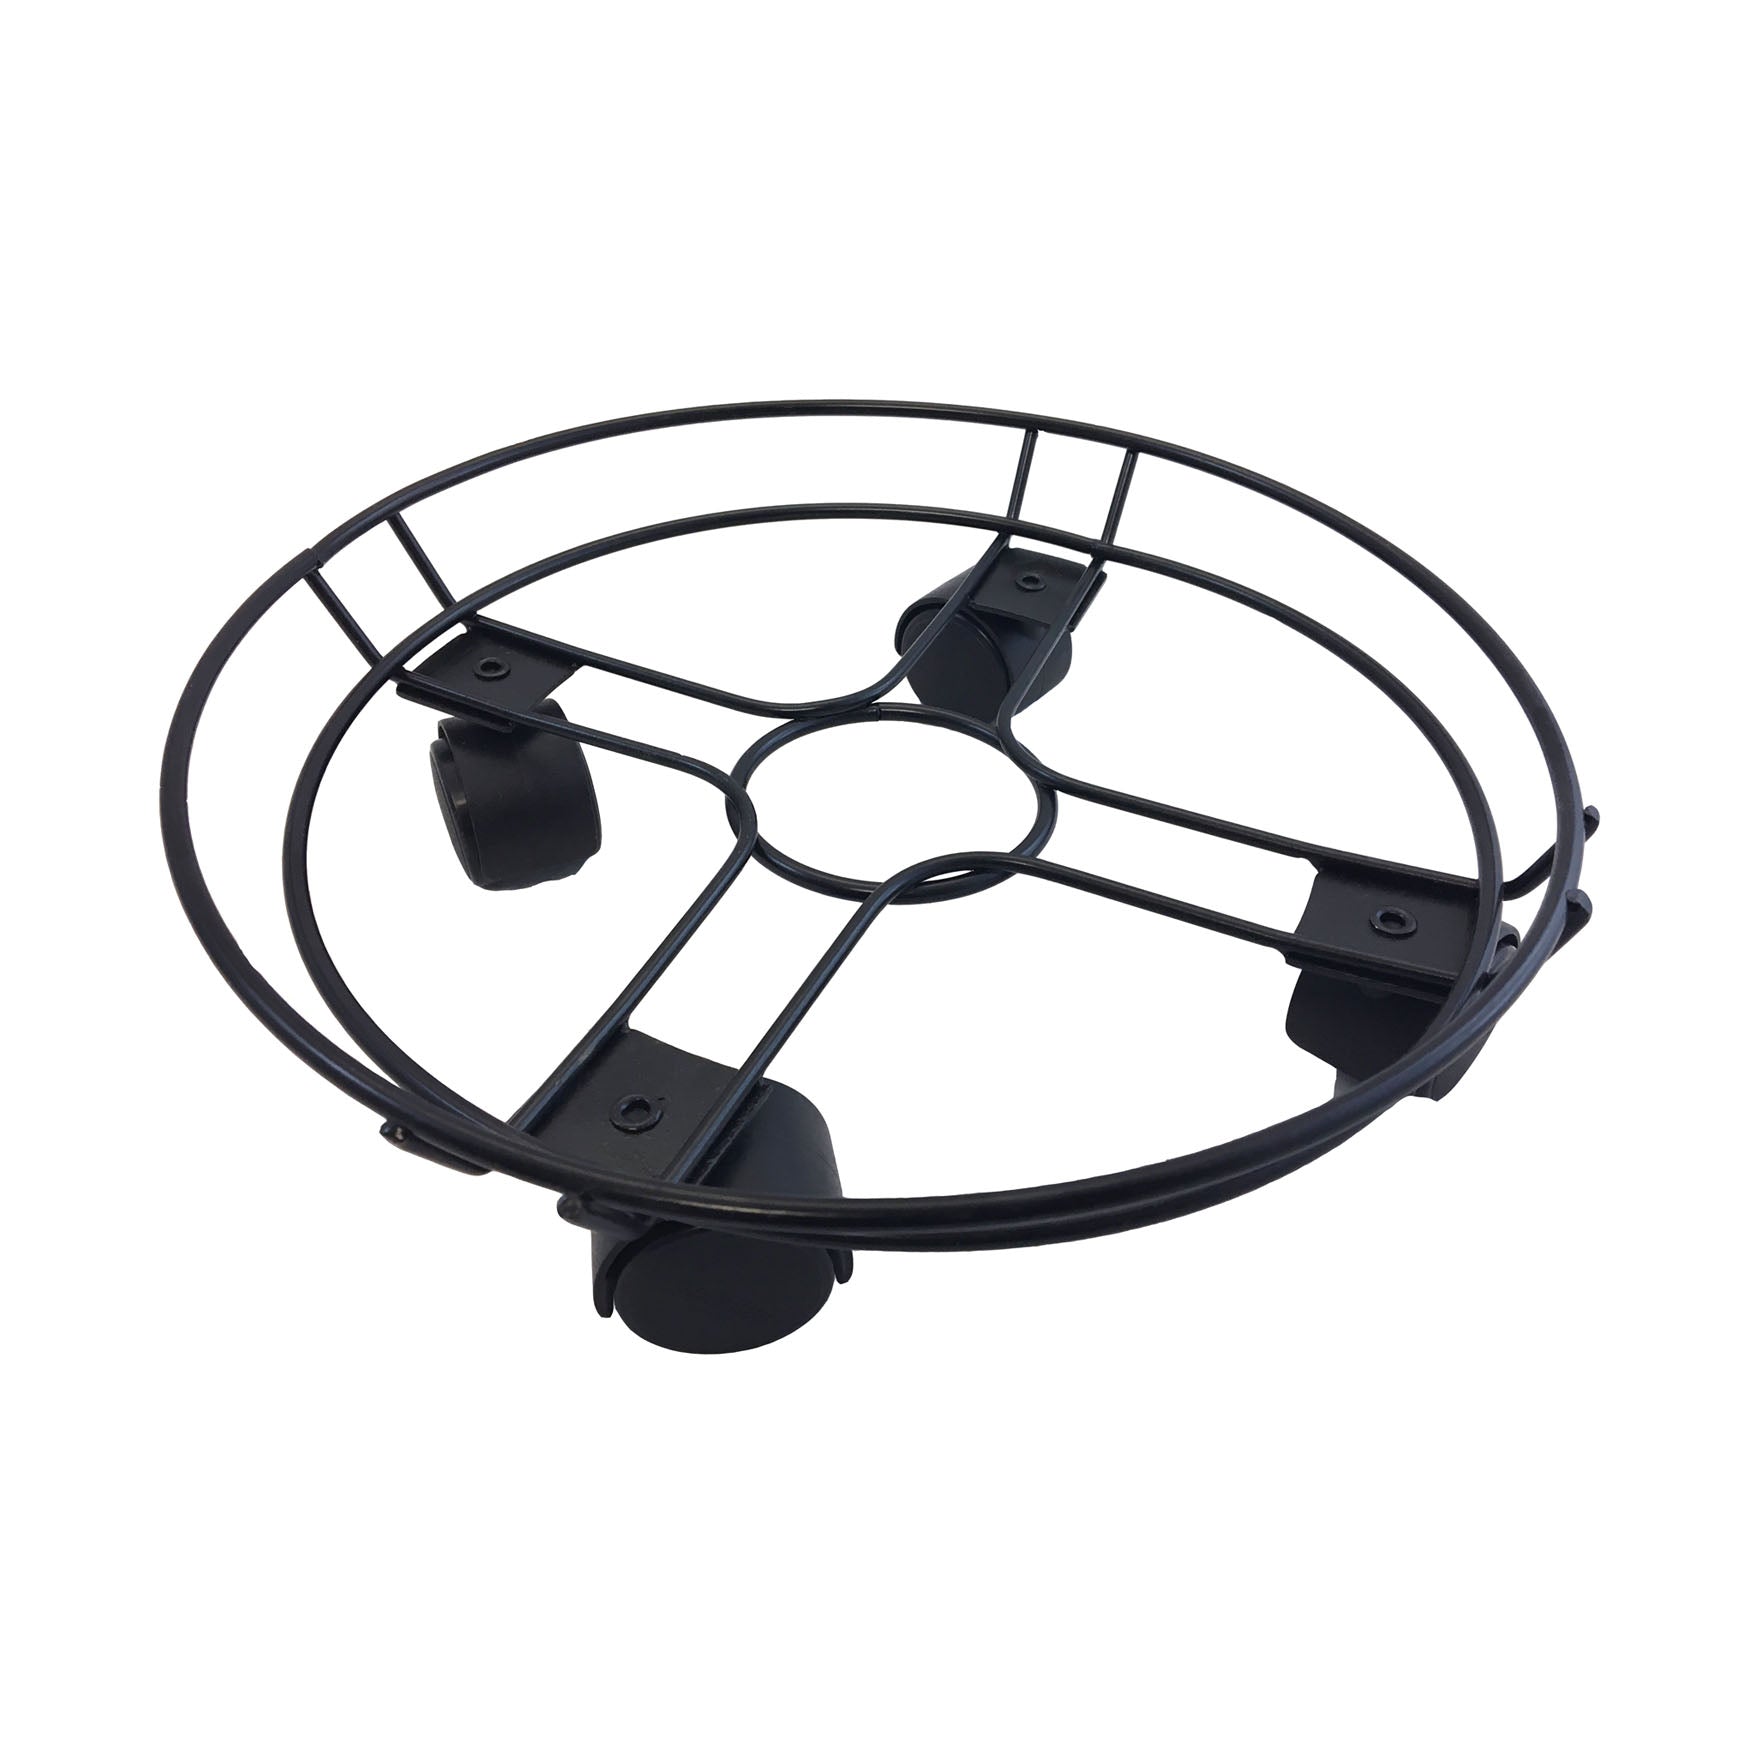 Black Round Wire Plant Caddy. 132 lbs capacity. 11.8"D x 2.5"H, 1.1 lbs.